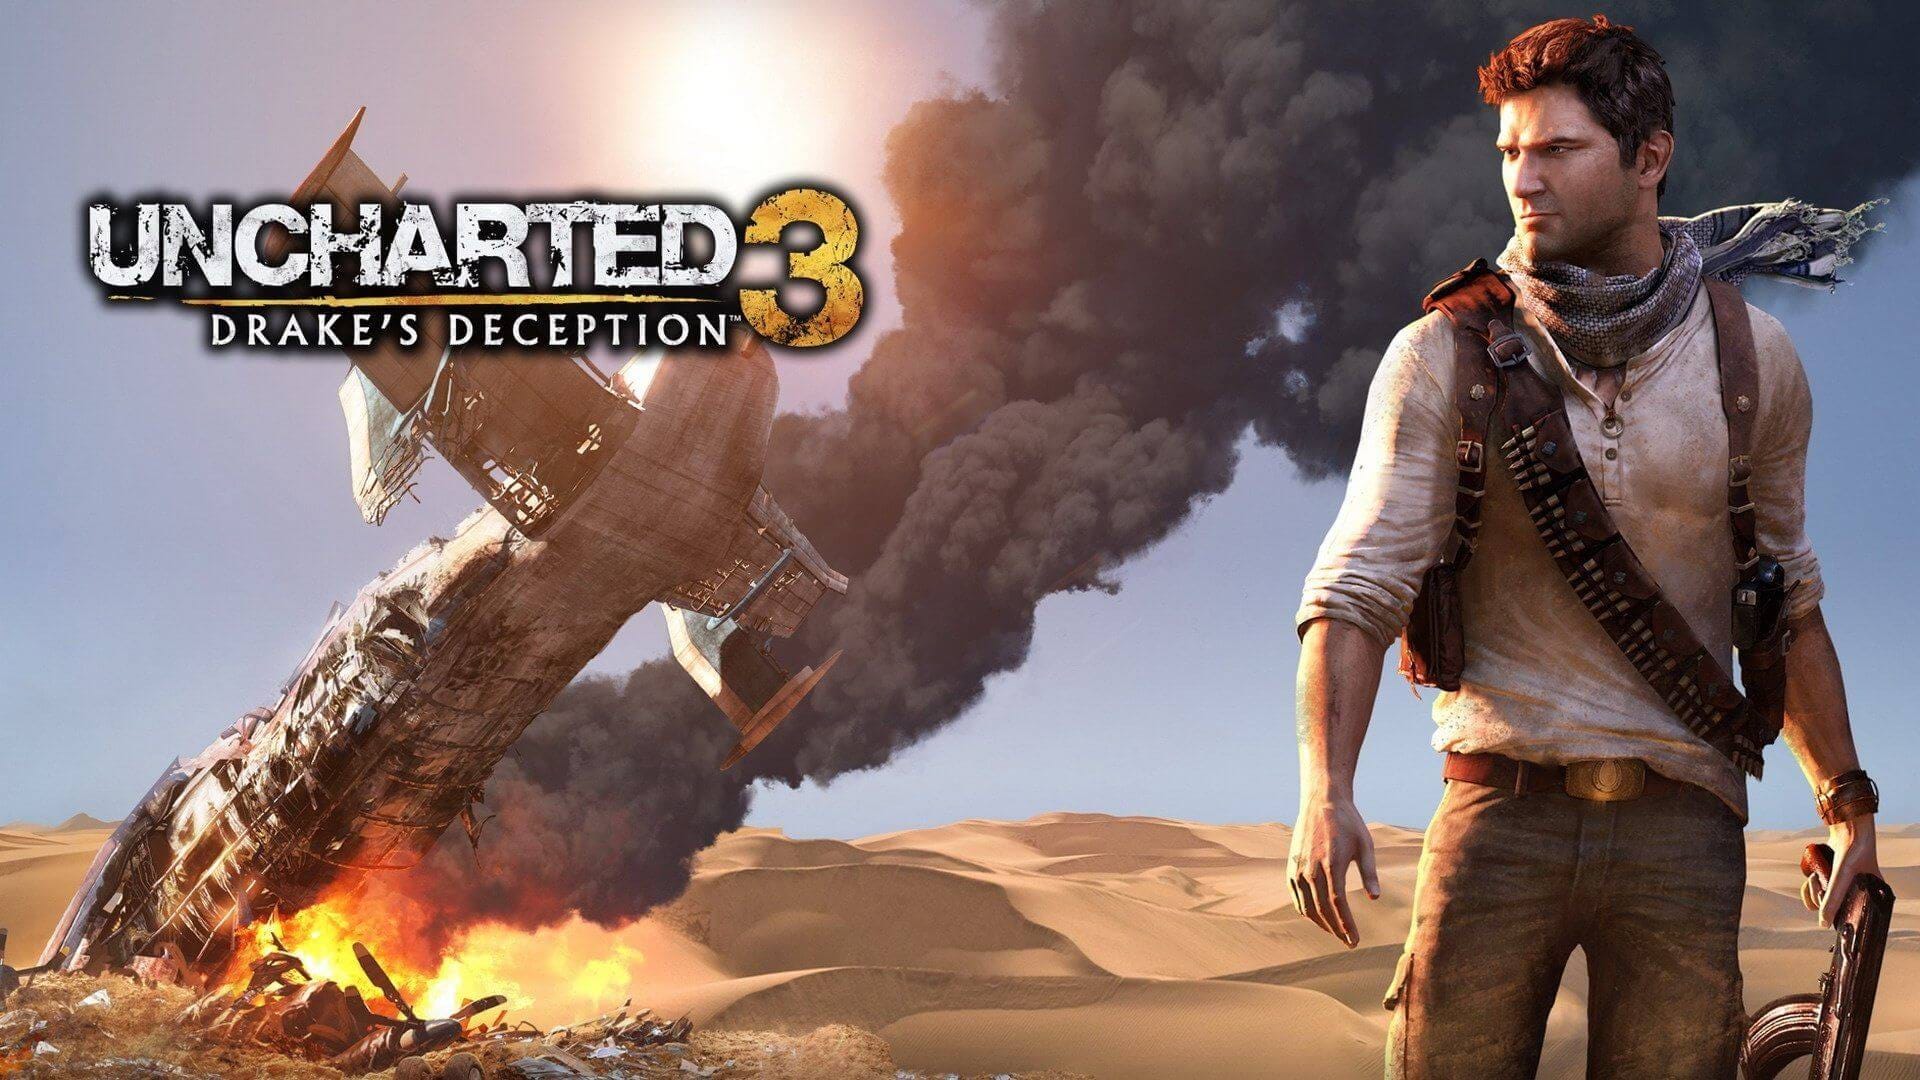 Uncharted 3 Drakes Deception Game of the Year Sony Playstation 3